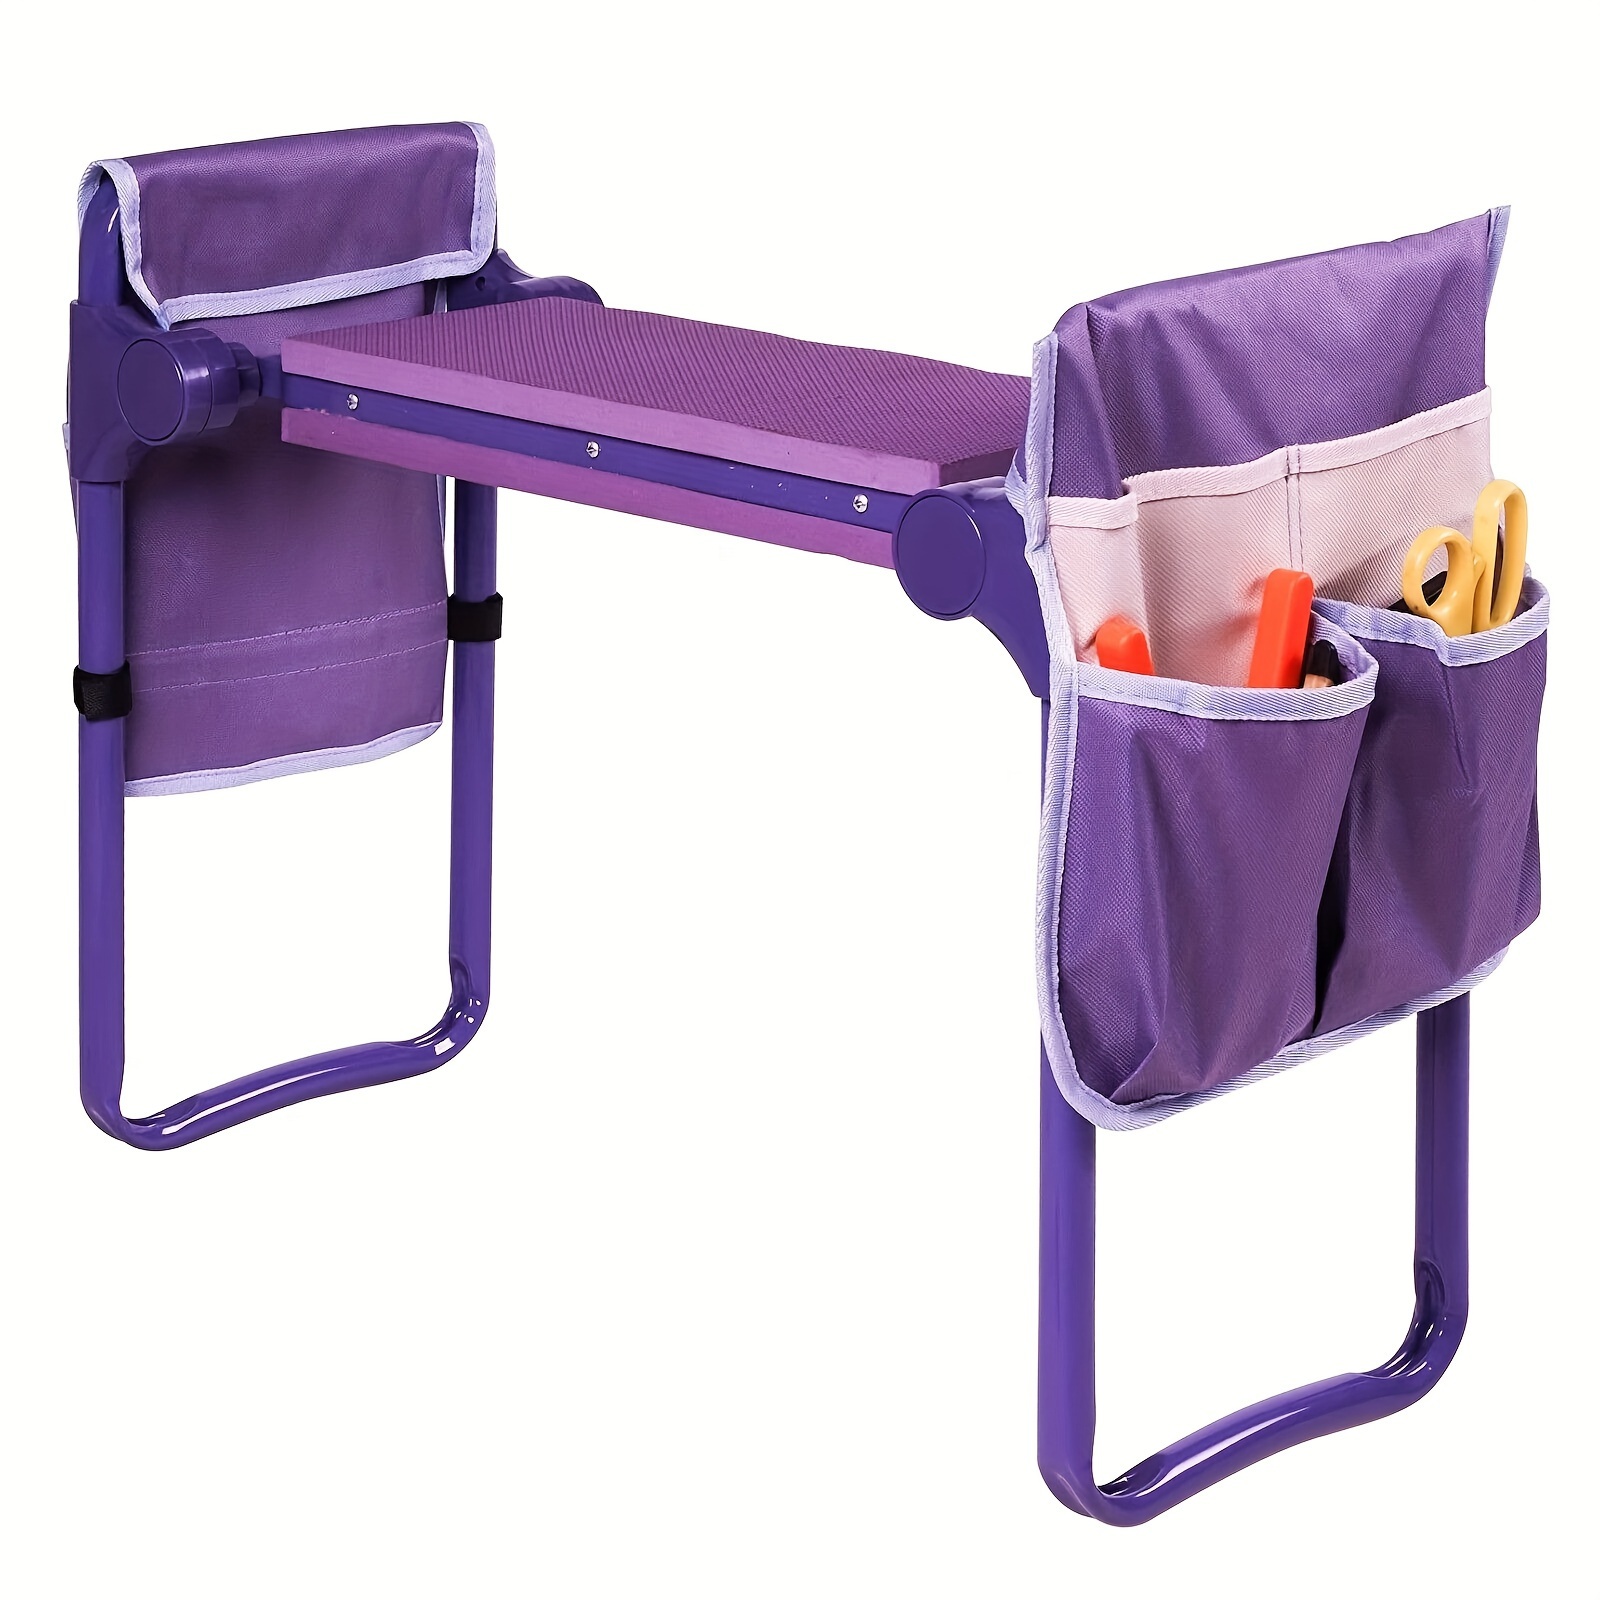 

New Generation Garden Kneeler And Seat With Soft Eva Pad Button-press Design, Foldable And Lightweight, Garden Stool With 2 Tool Bags, Purple